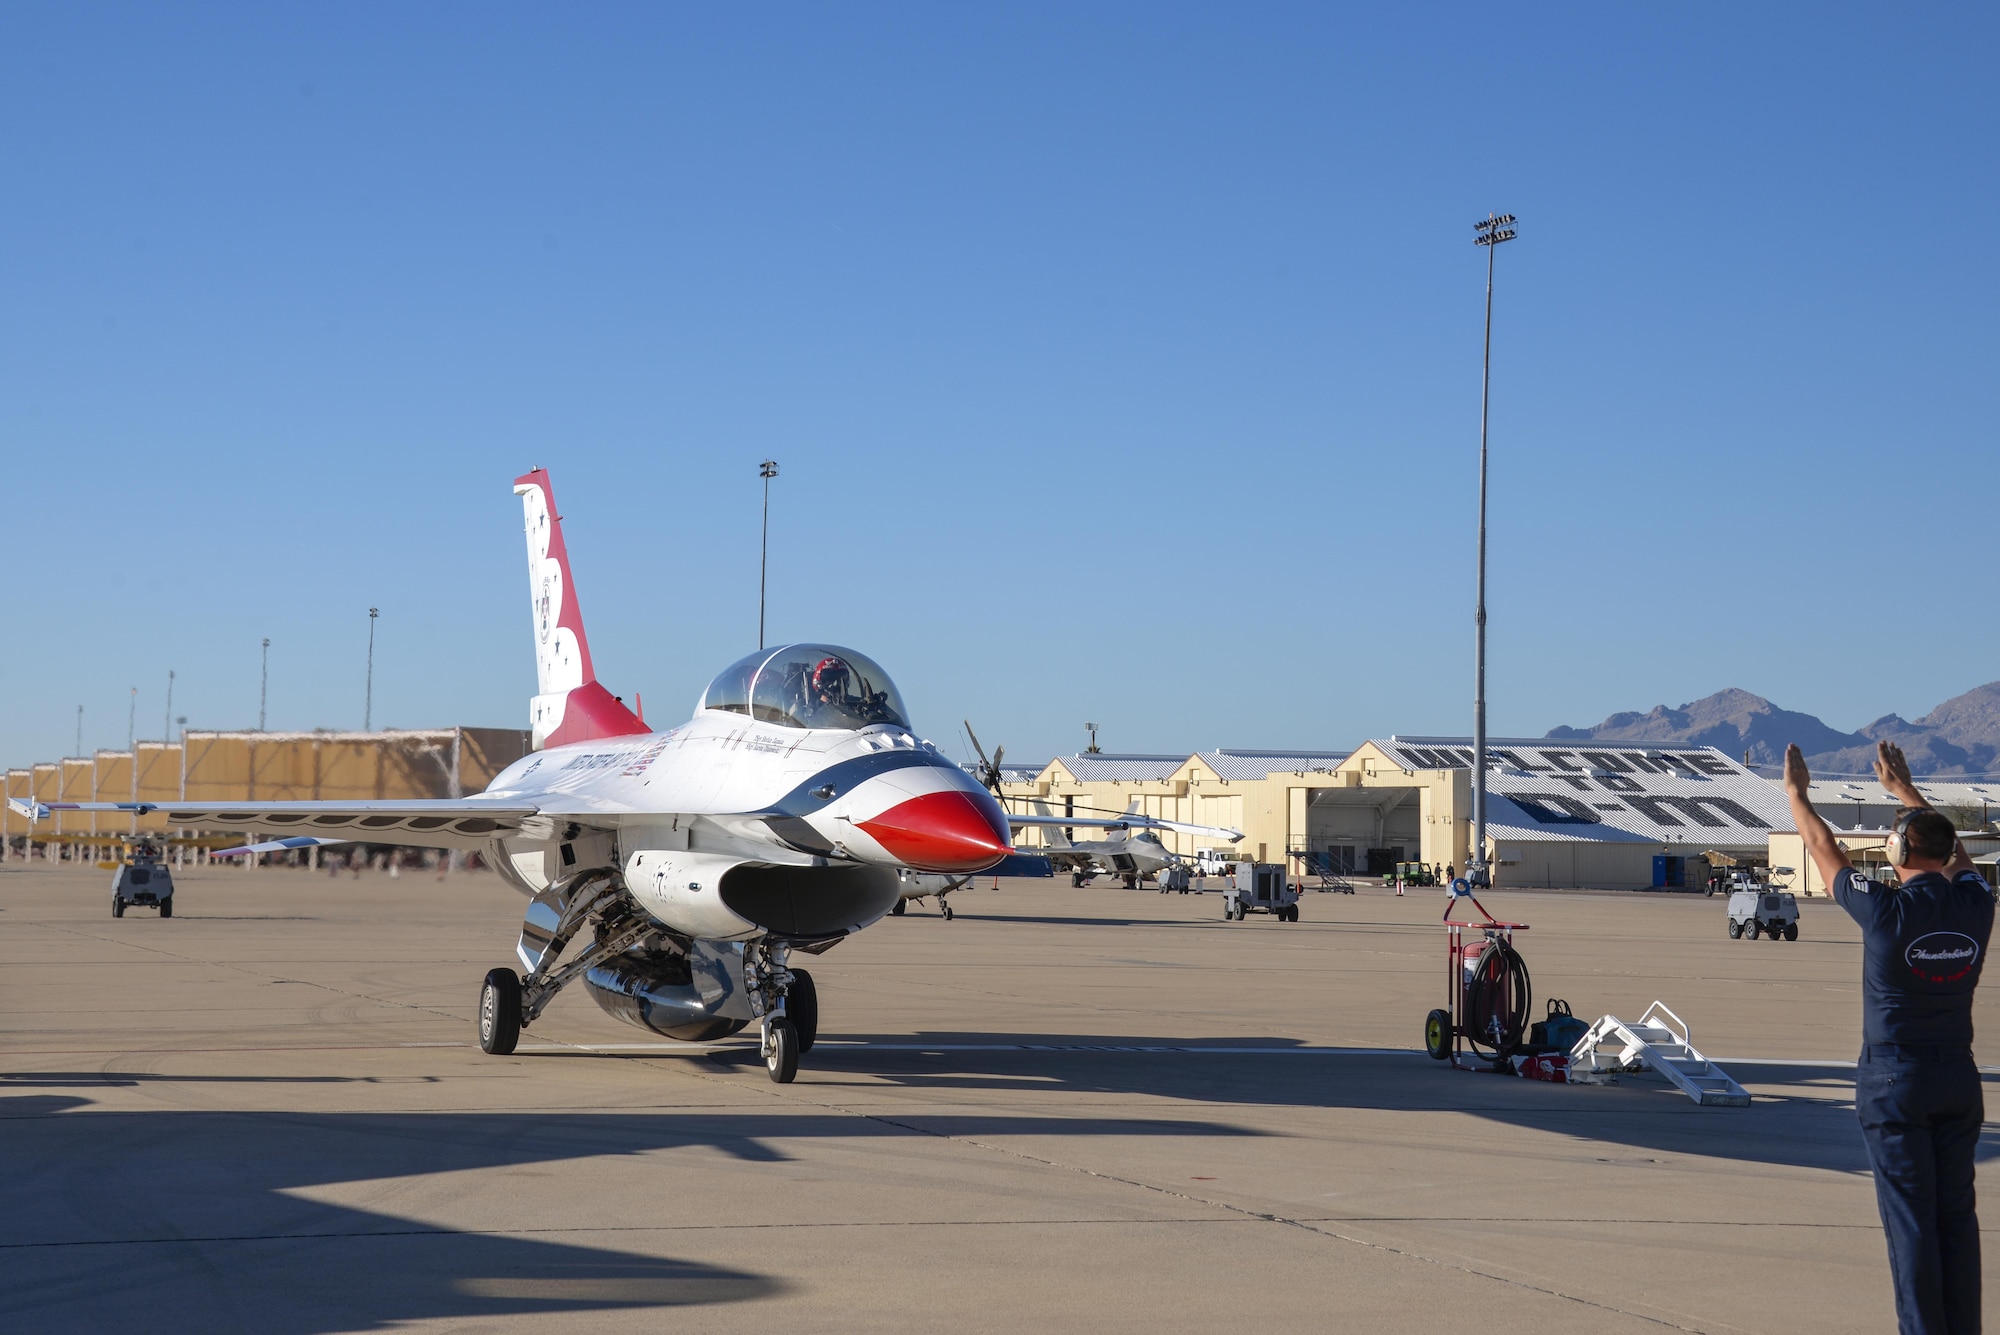 U.S. Air Force Maj. Kevin Walsh, U.S. Air Force Air Demonstration Squadron pilot and operations officer, taxis Thunderbird 7, an F-16 Fighting Falcon, with Brendon Lyons, Tucson community hometown hero, in the rear seat at Davis-Monthan Air Force Base, Ariz., March 11, 2016.  Lyons was nominated as a hometown hero because of his commitment to safety and his passion to make Tucson a safer community for cyclists and motorists.  (U.S. Air Force photo by Senior Airman Chris Massey/Released)